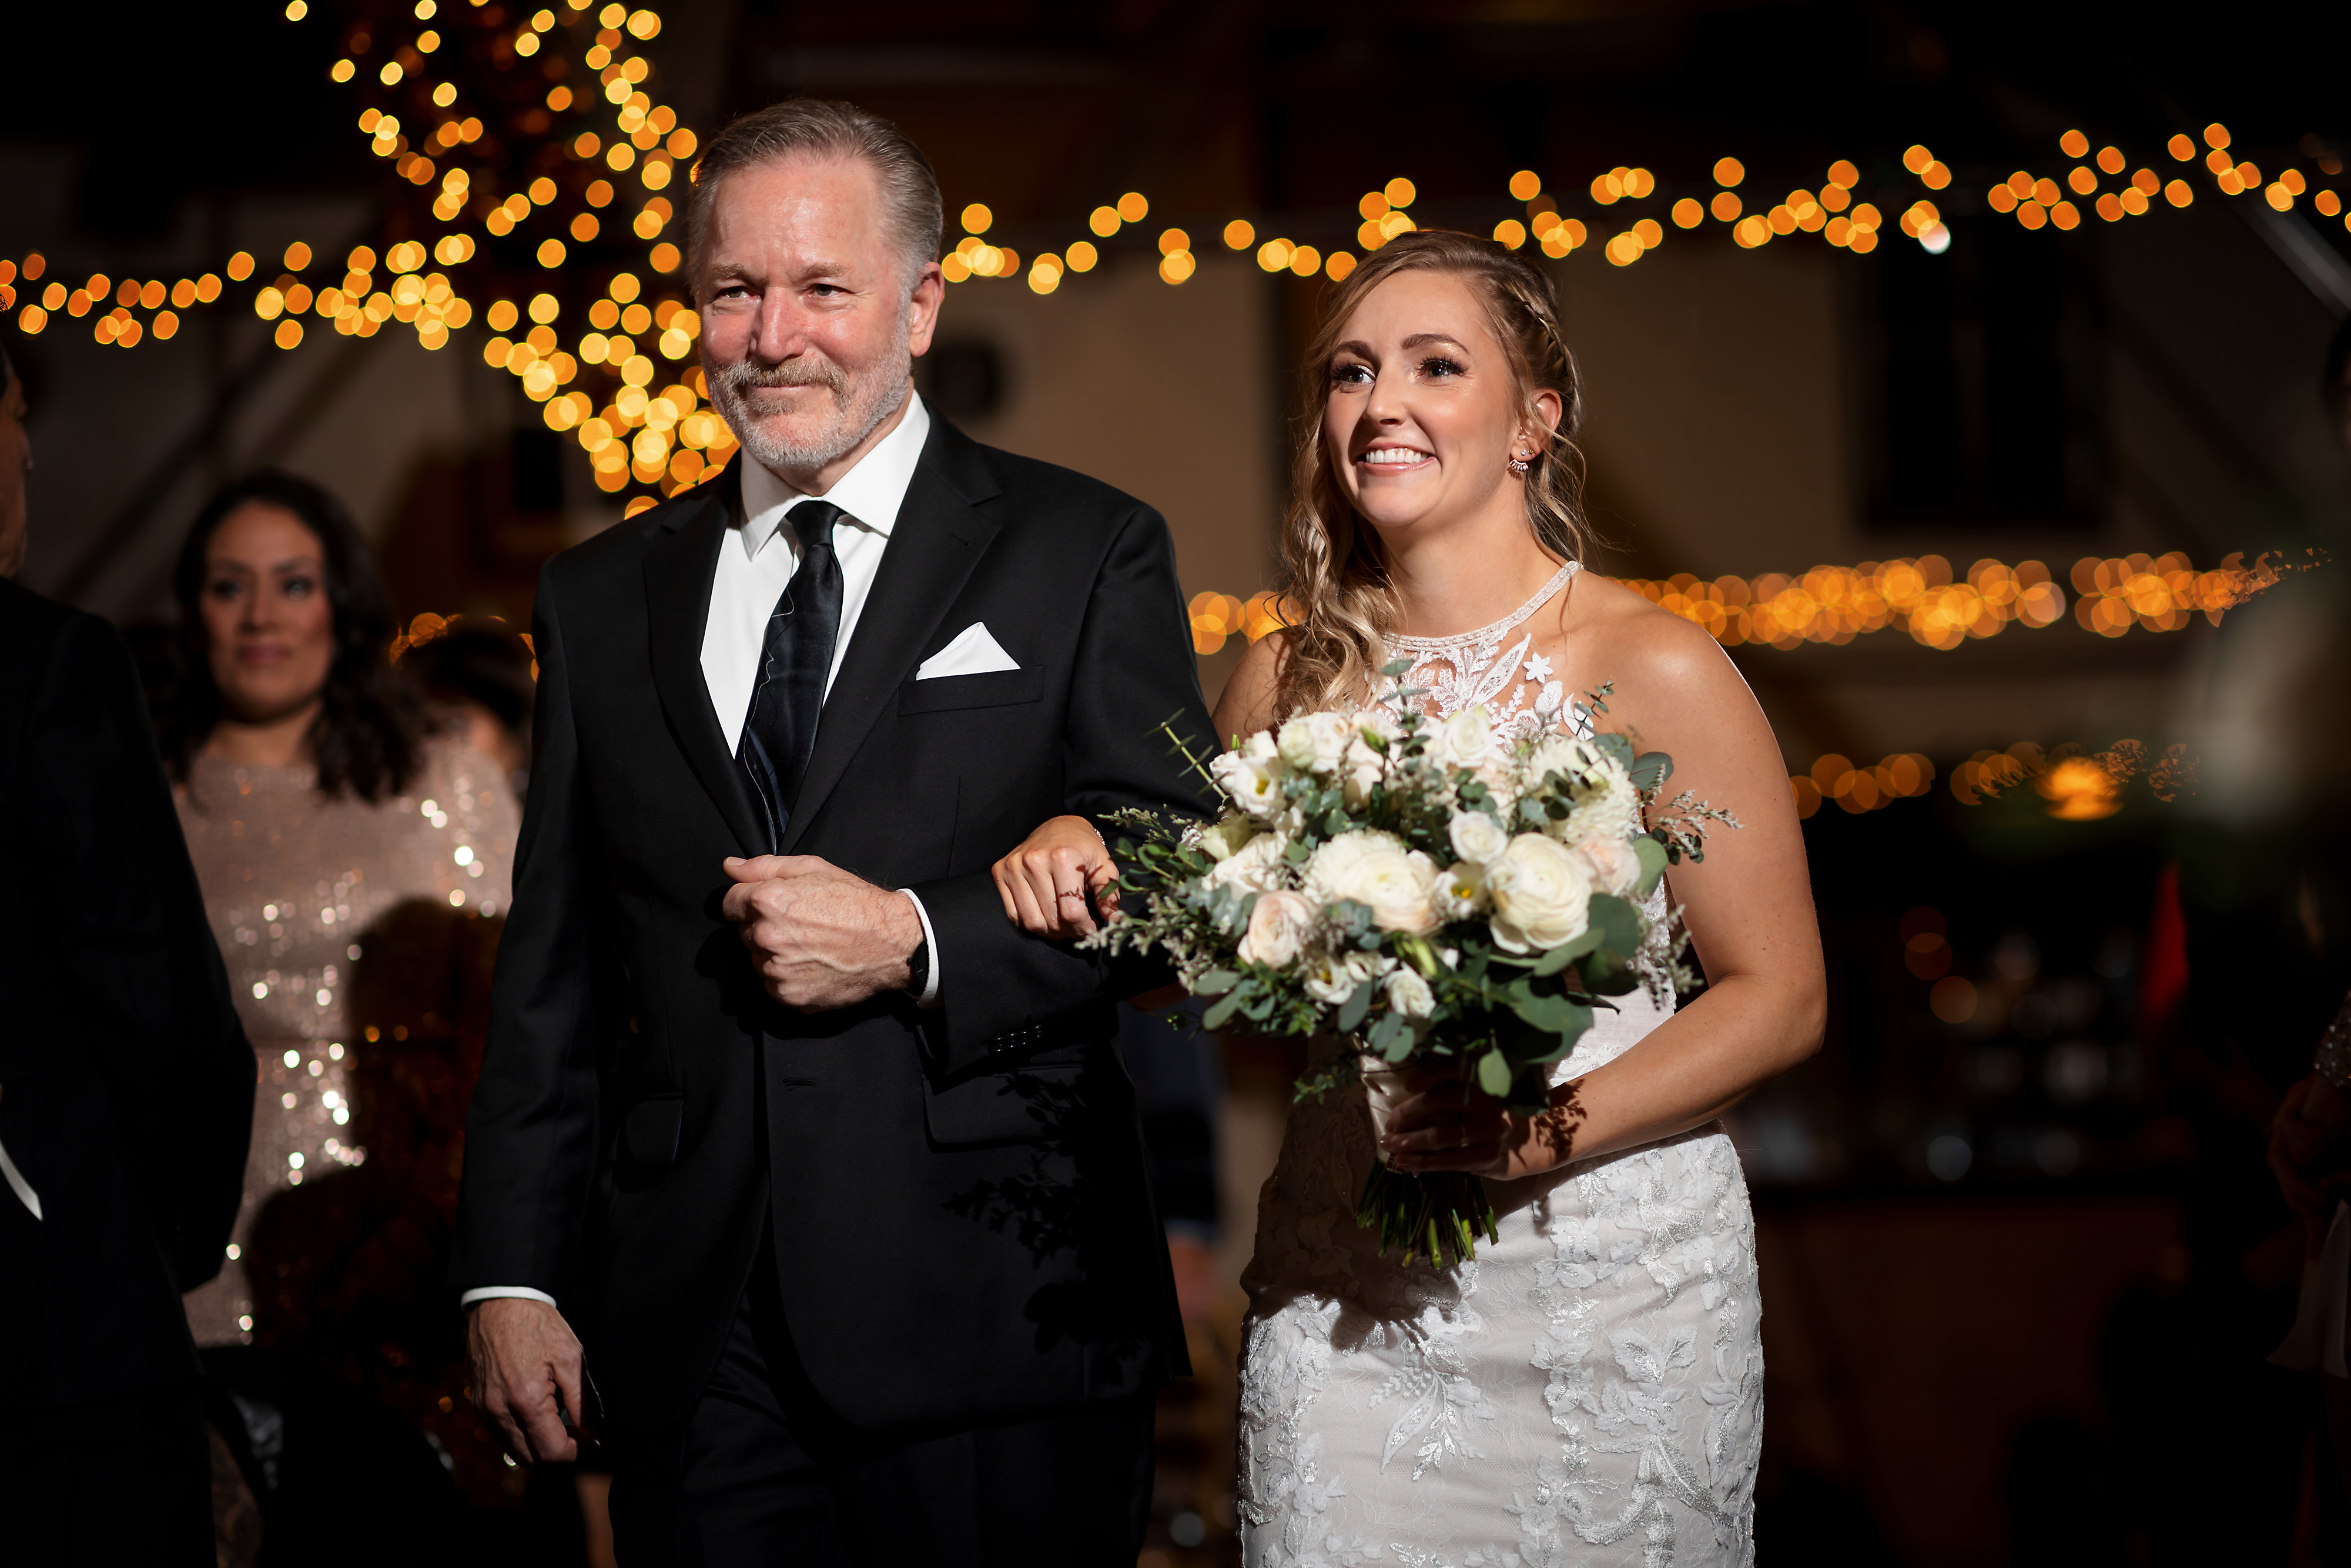 Bride walks down the aisle with her father during wedding ceremony at Two Brothers Brewing in Aurora, Illinois